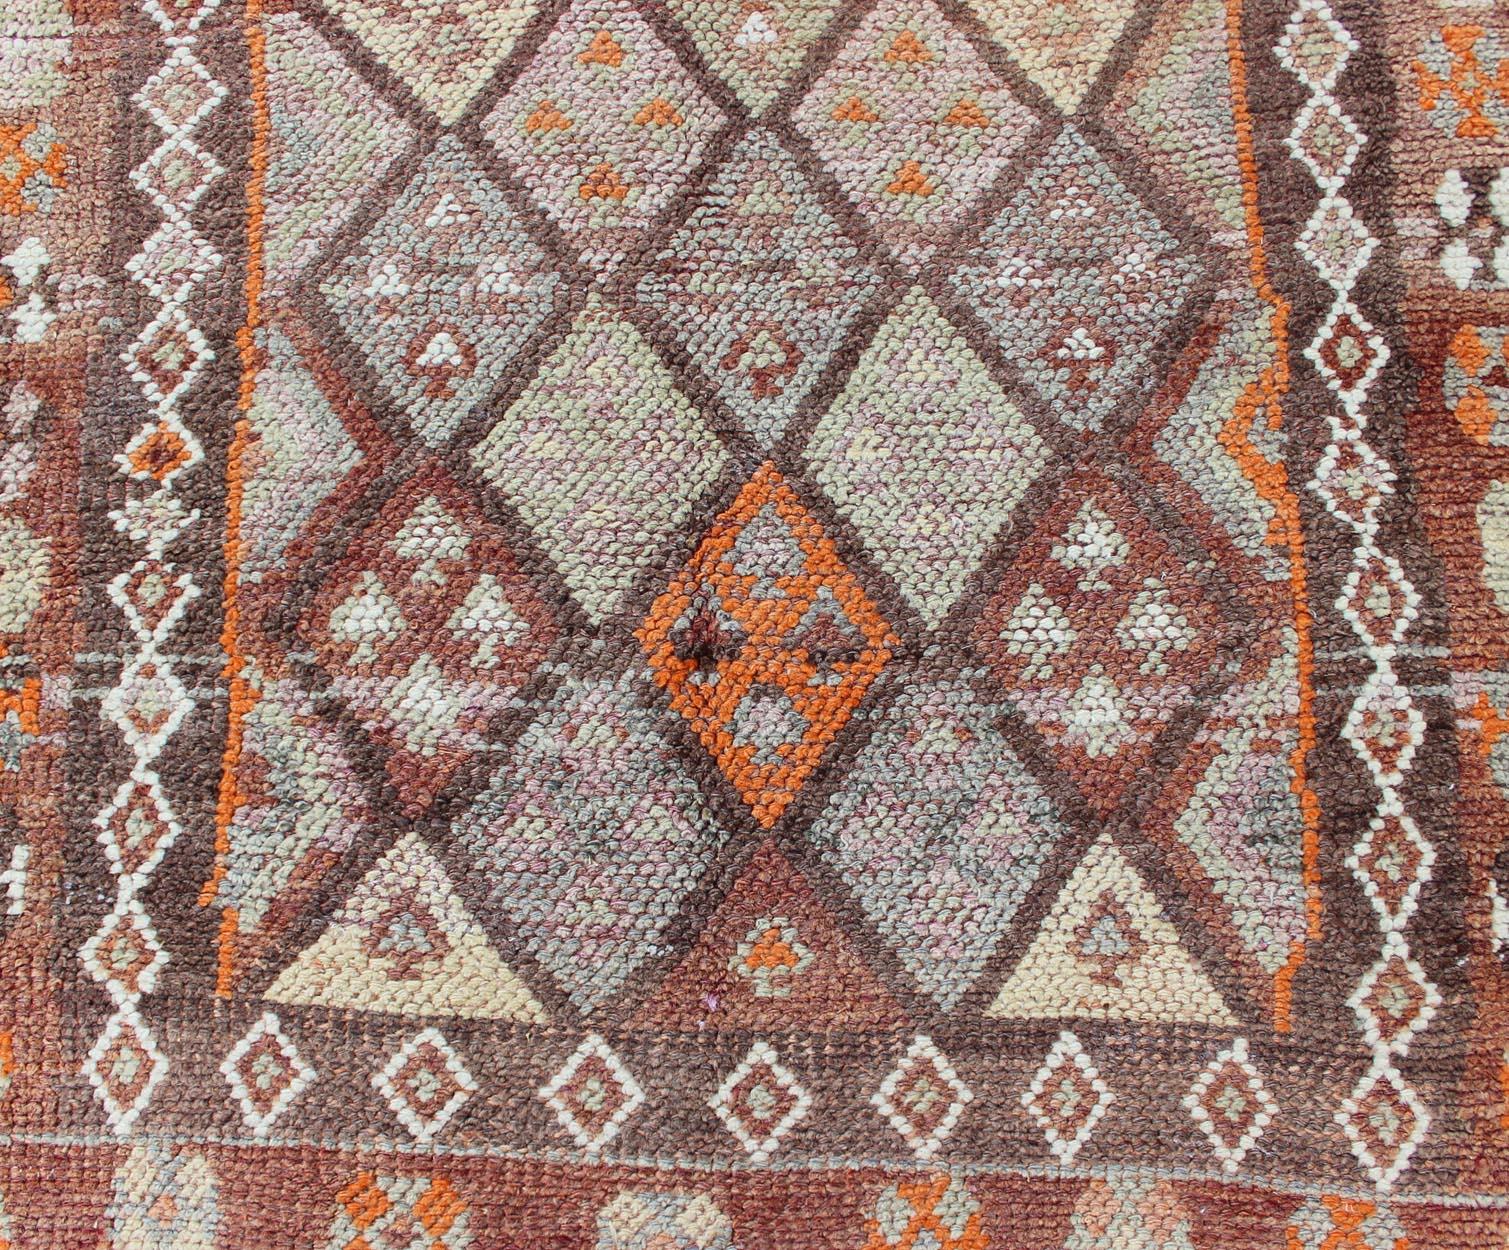 Wool Vintage Turkish Runner with All-Over Diamond Kurdish Design in Multi-Colors For Sale